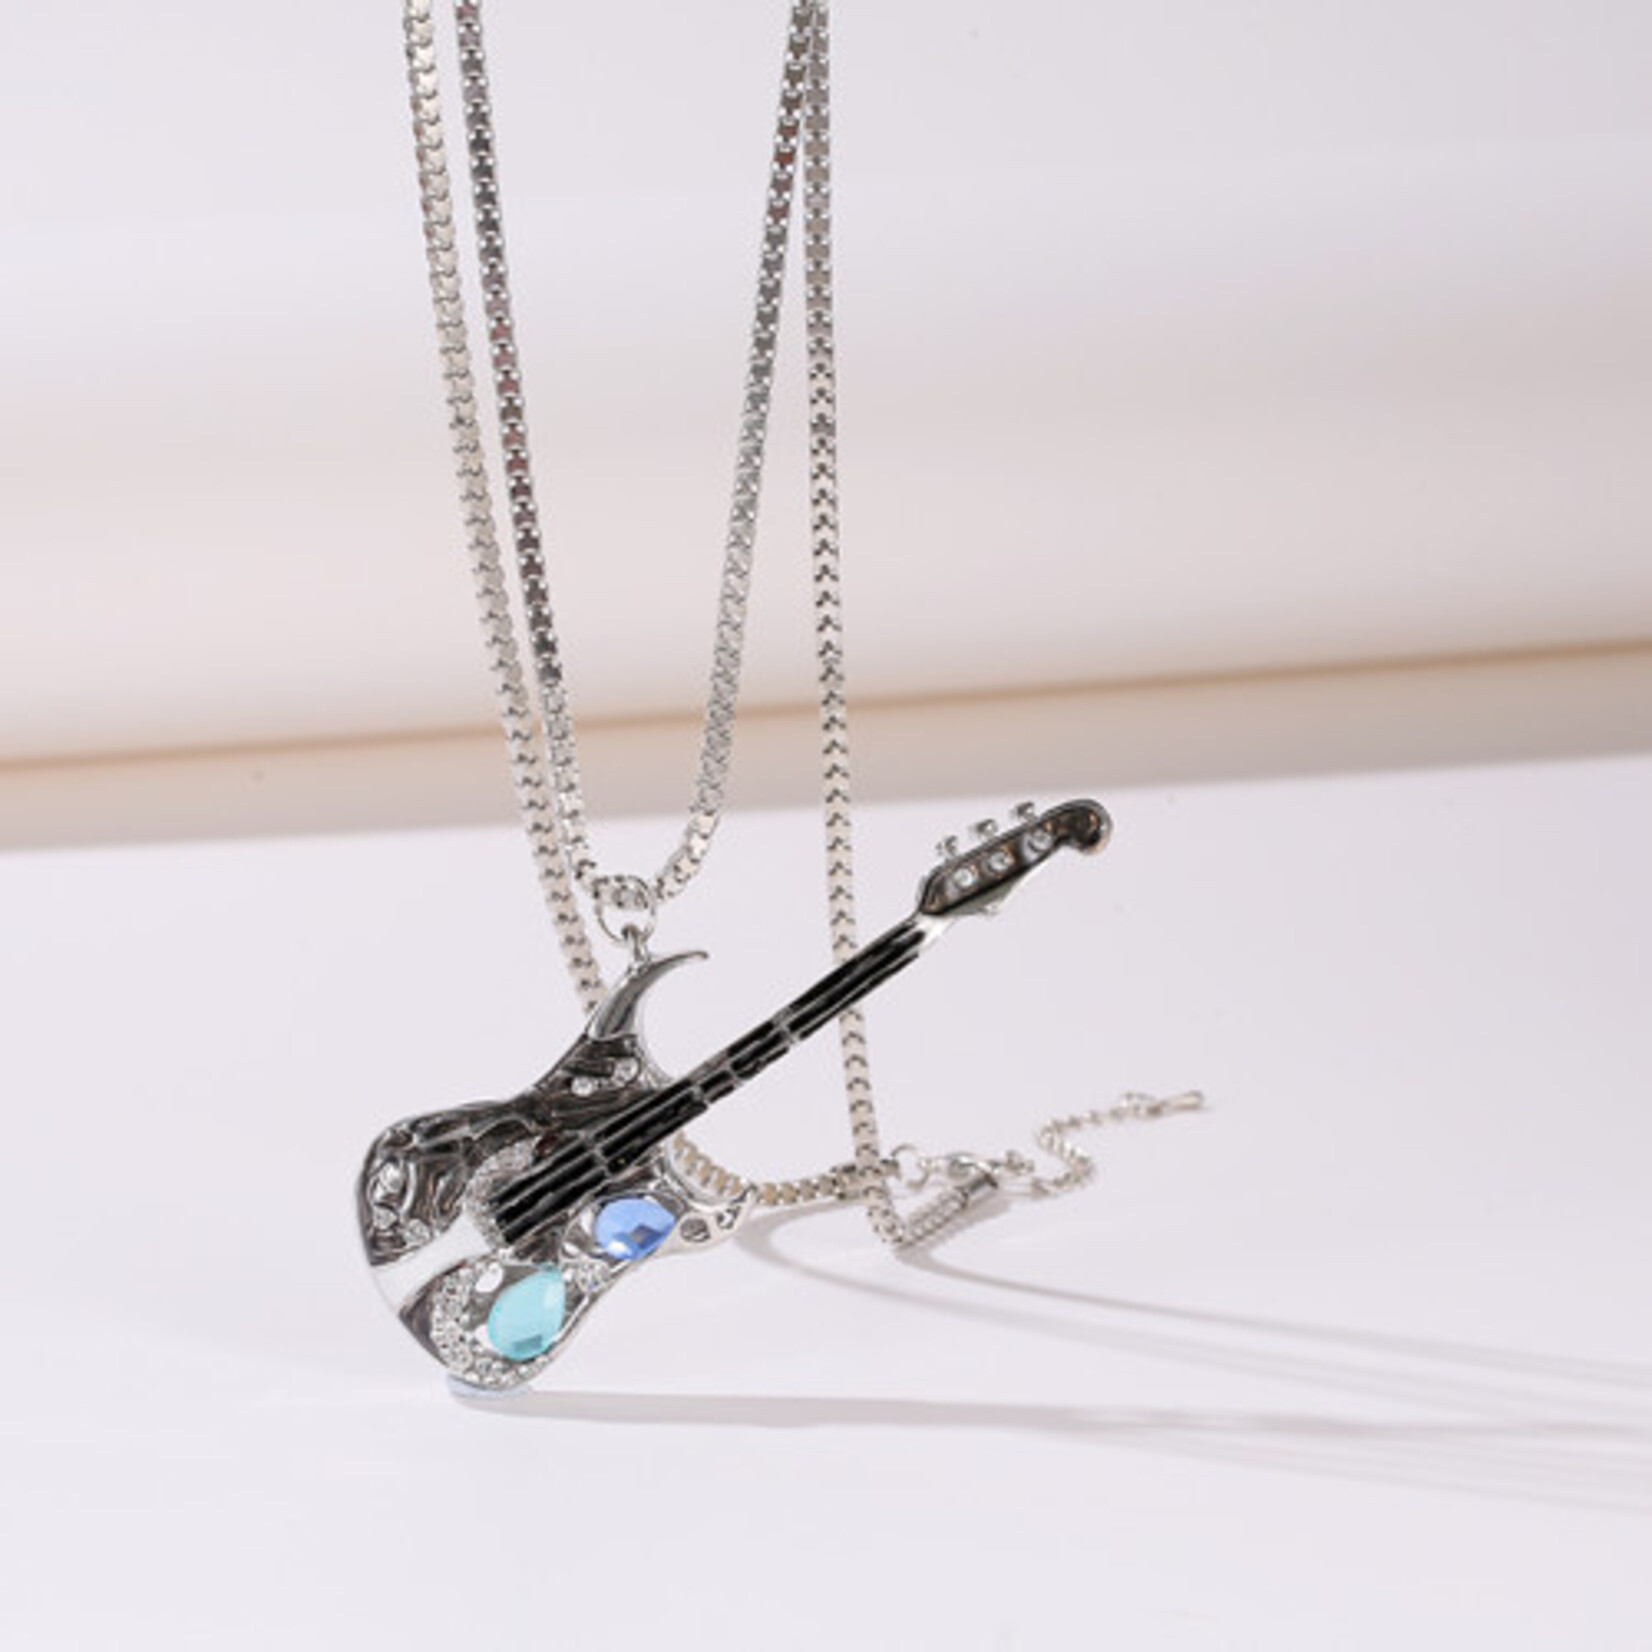 fashion jewelry Fashion jewelry silver box chain with guitar pendant, necklace